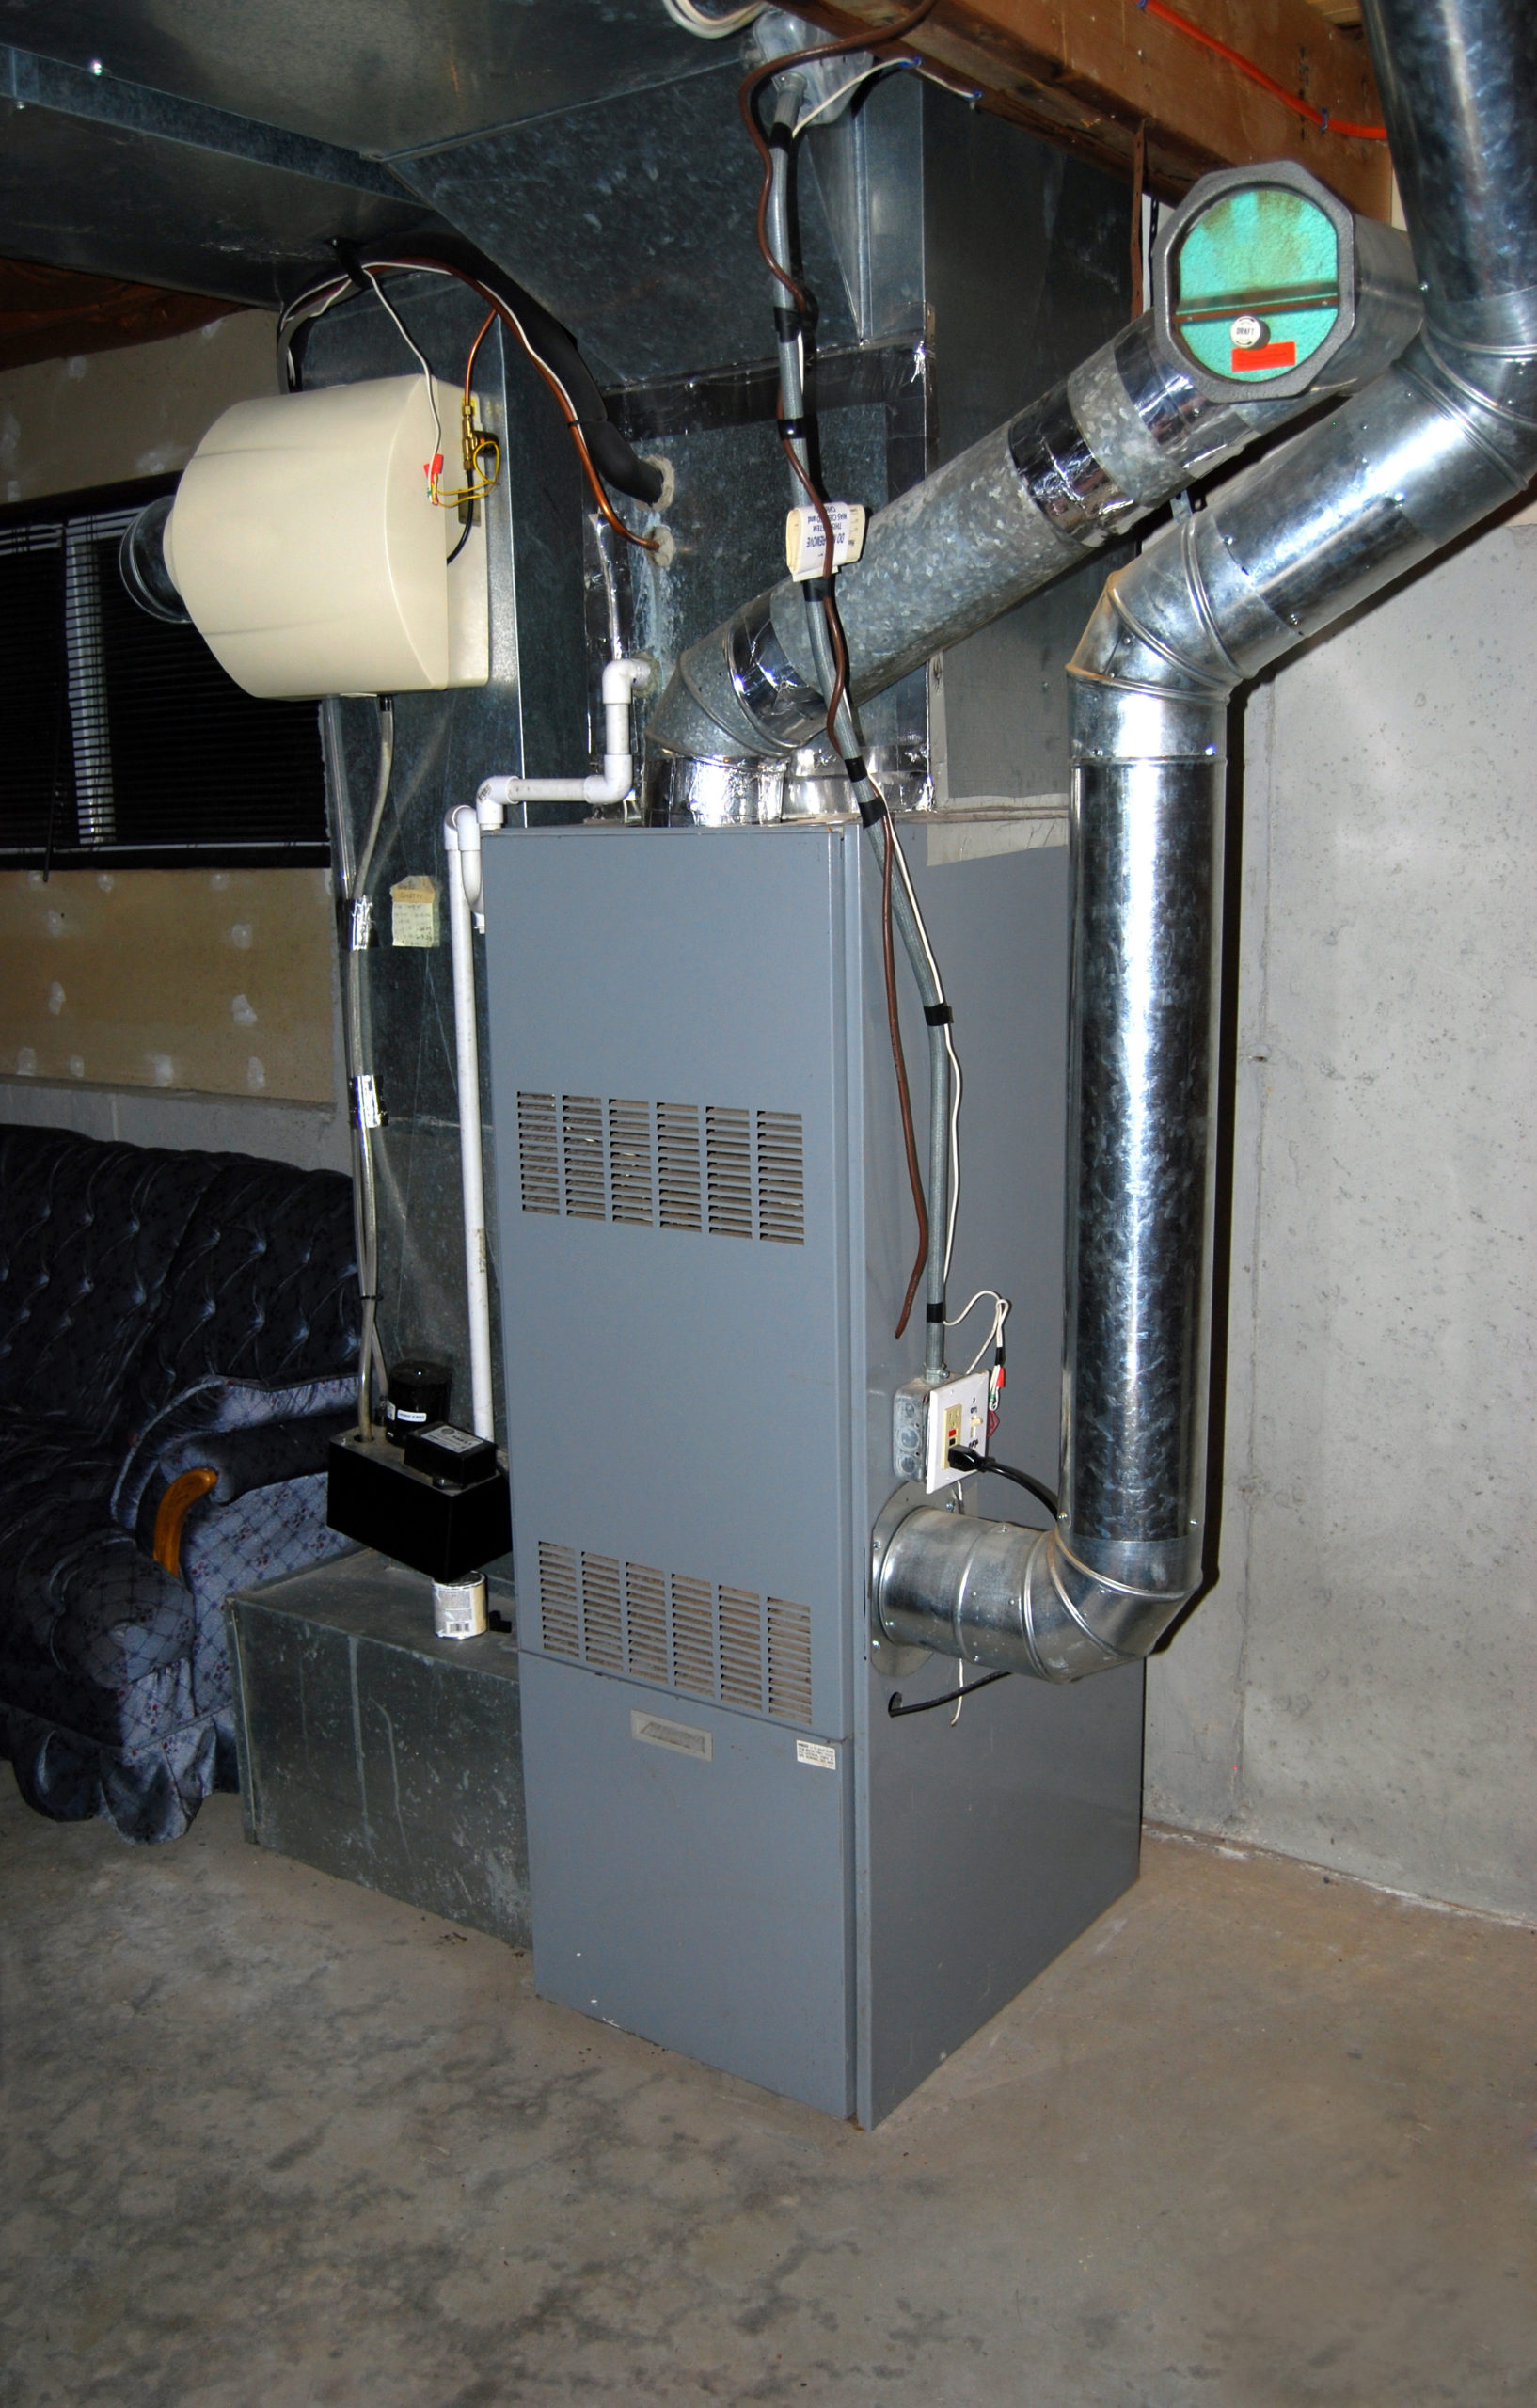 oil furnace in basement of home